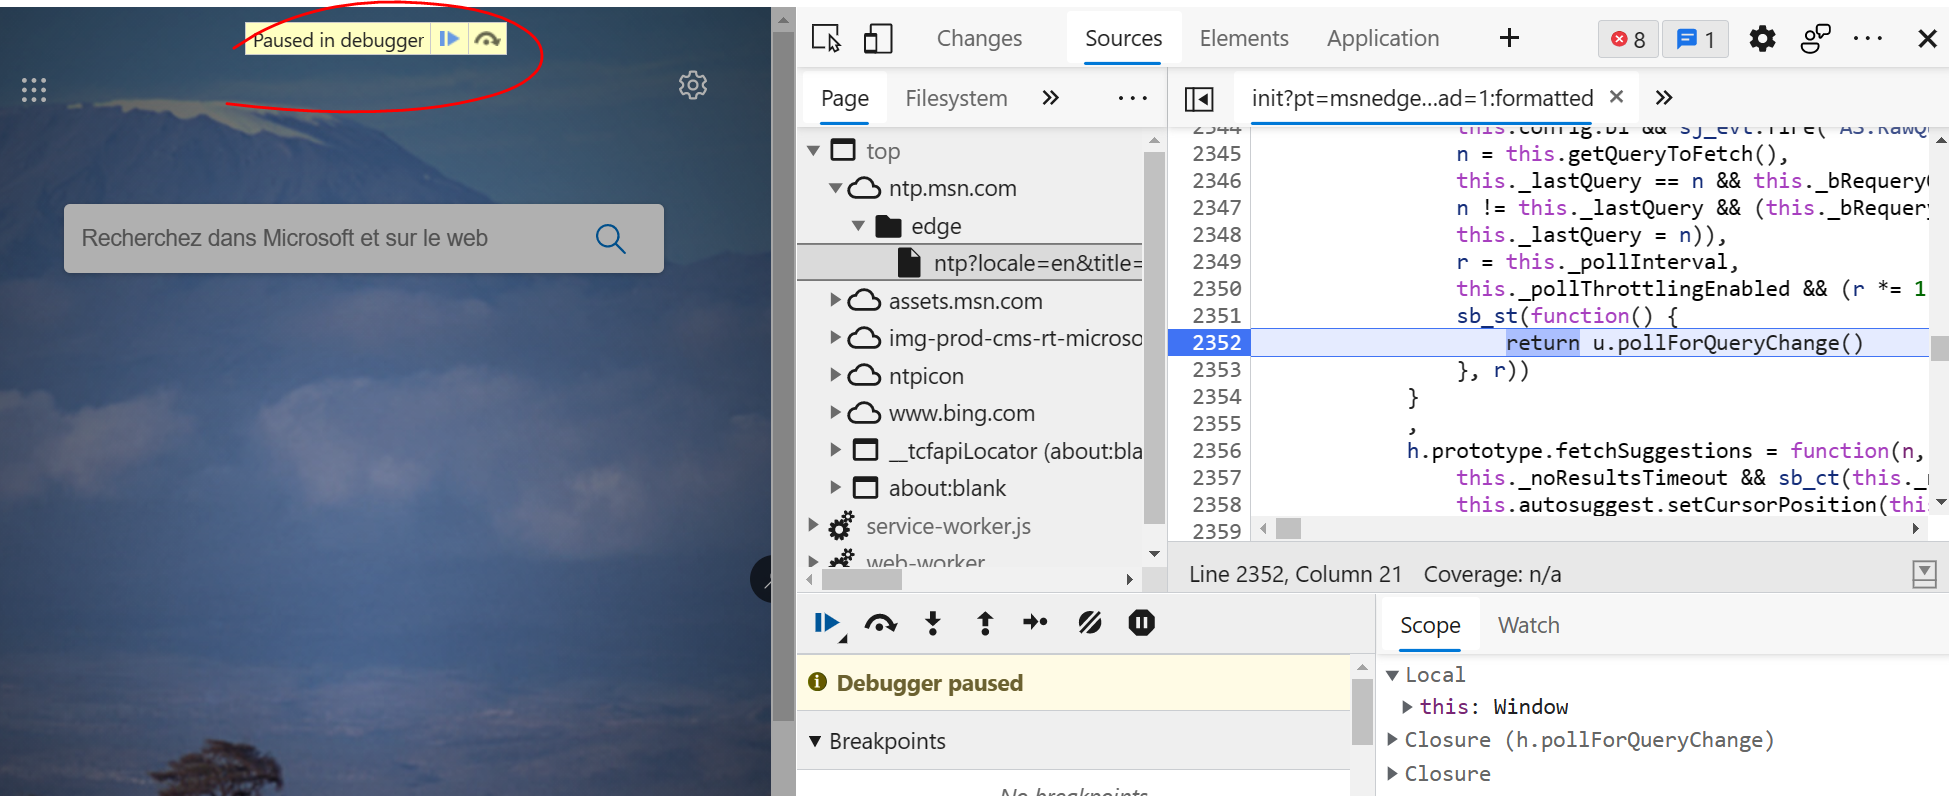 Screenshot of a page in edge with the DevTools Sources paused at a location, and the on-page overlay preventing access to the page